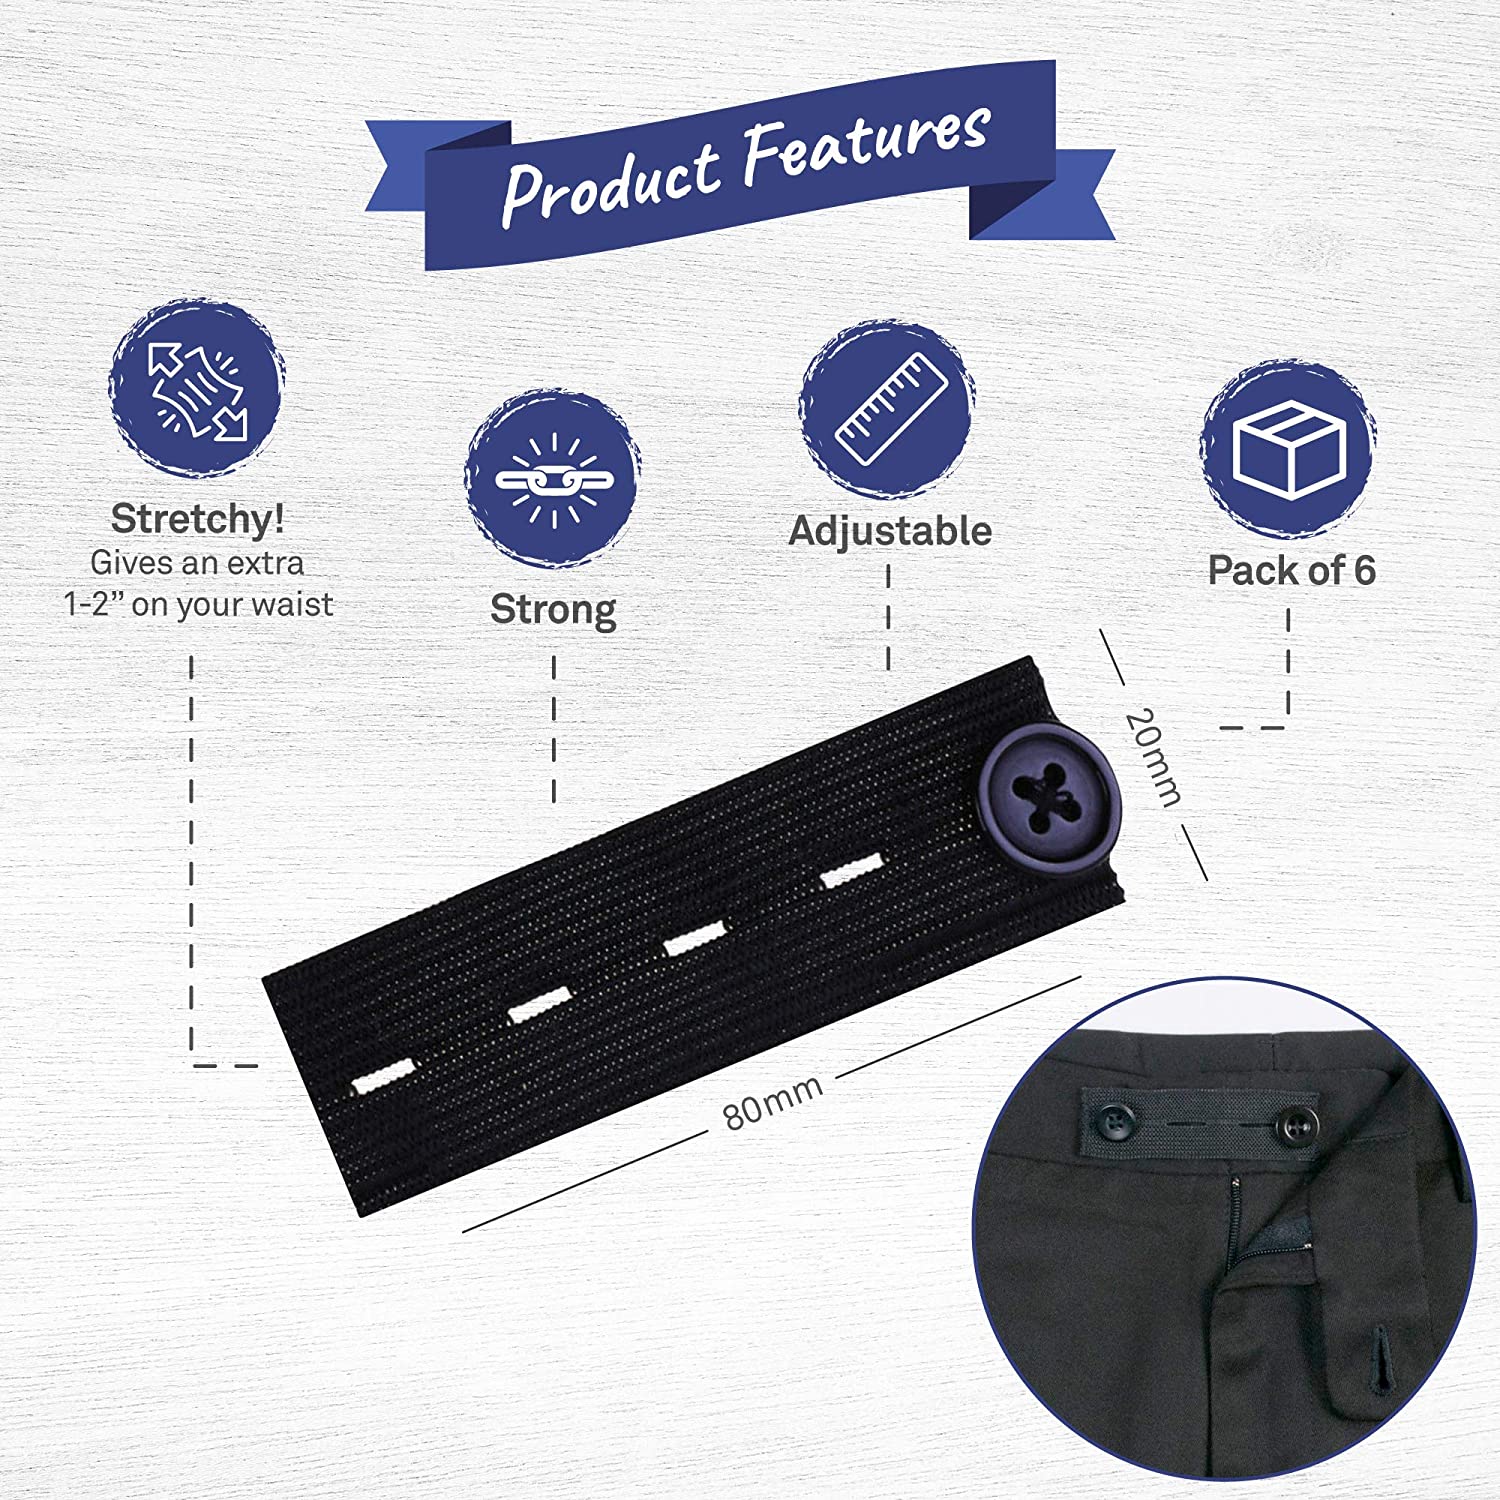 Button Extender Product Feature